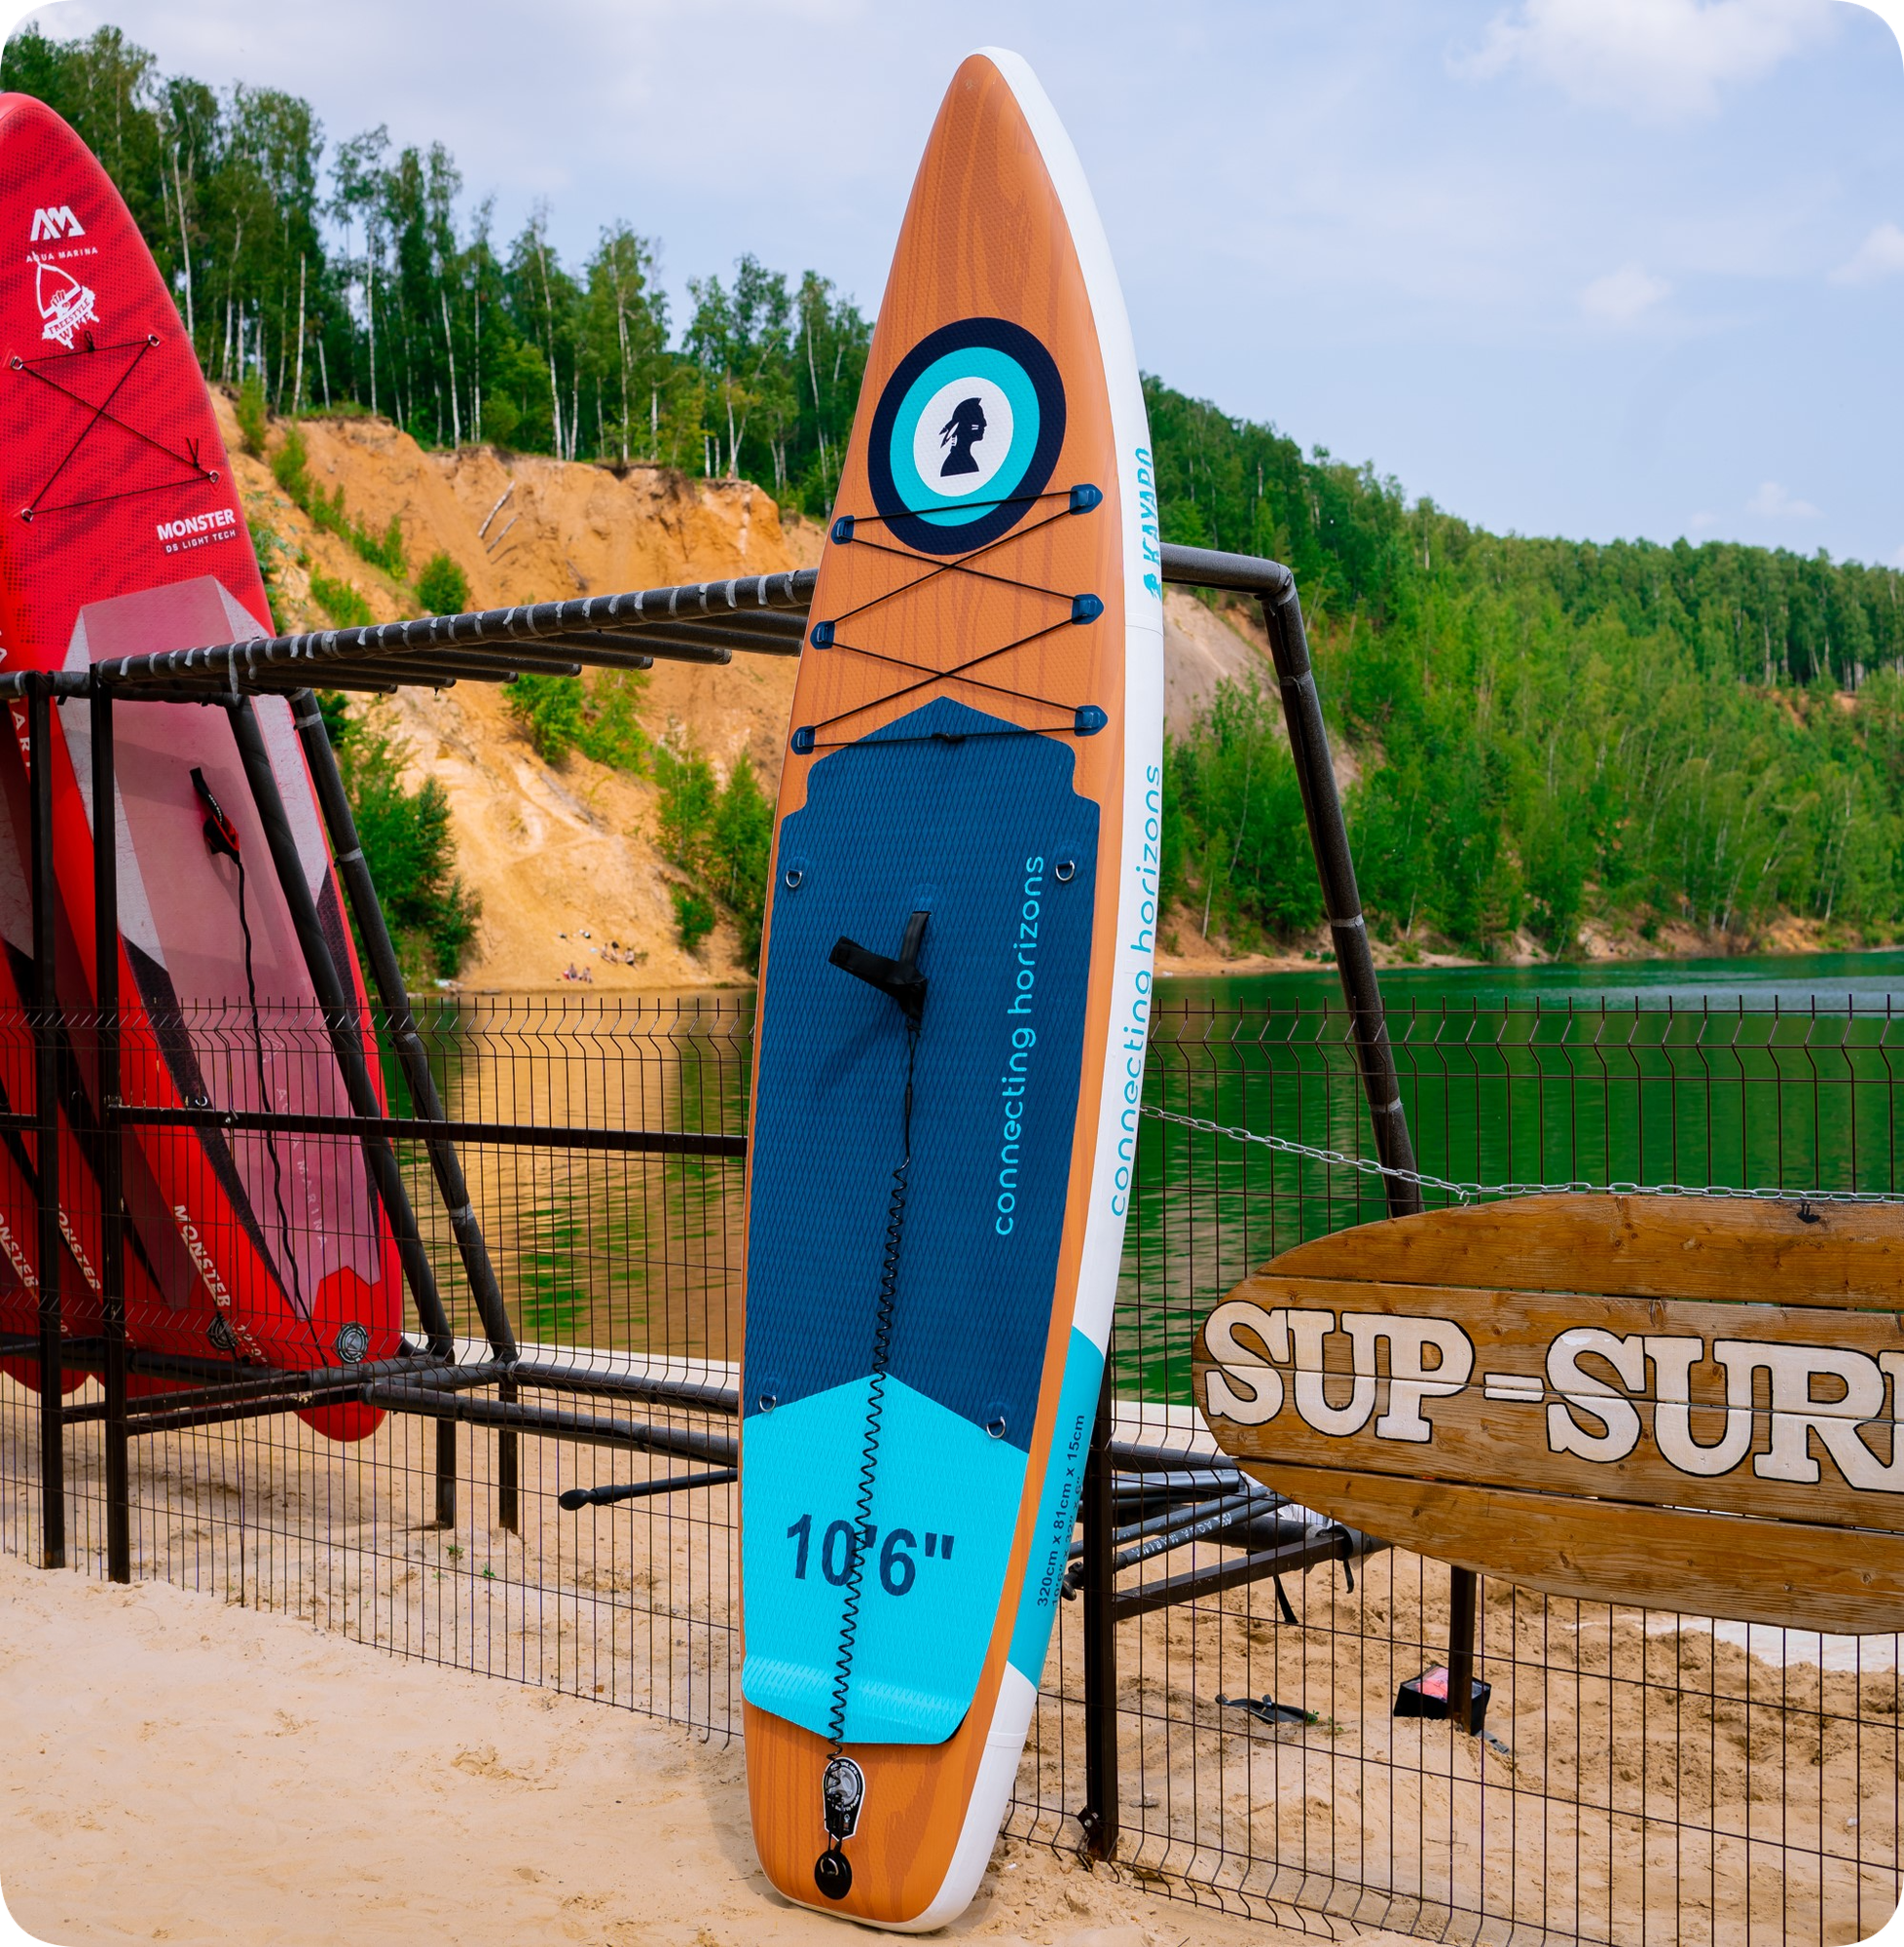 Sup-доска / sup board / сап-борд 